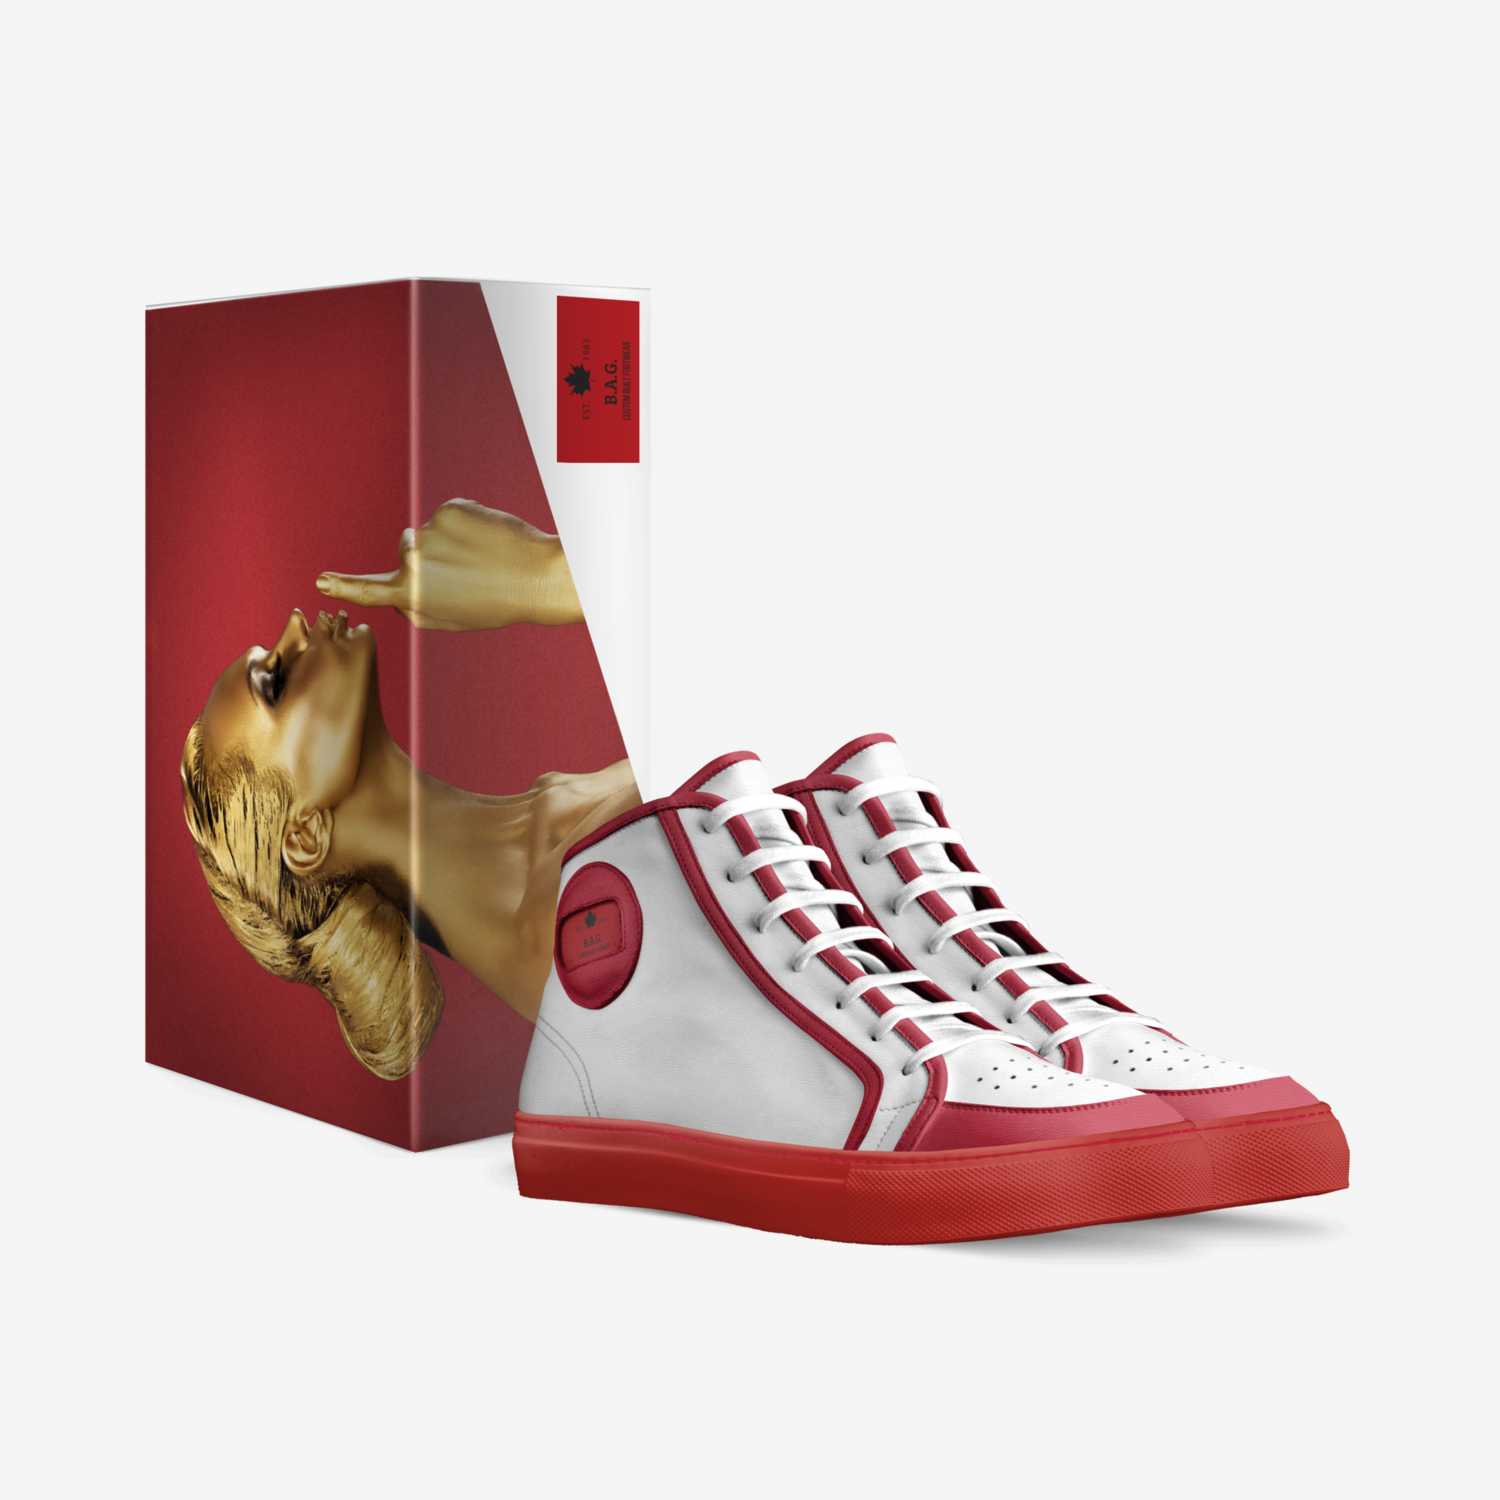 B.A.G. custom made in Italy shoes by Willie Blige | Box view